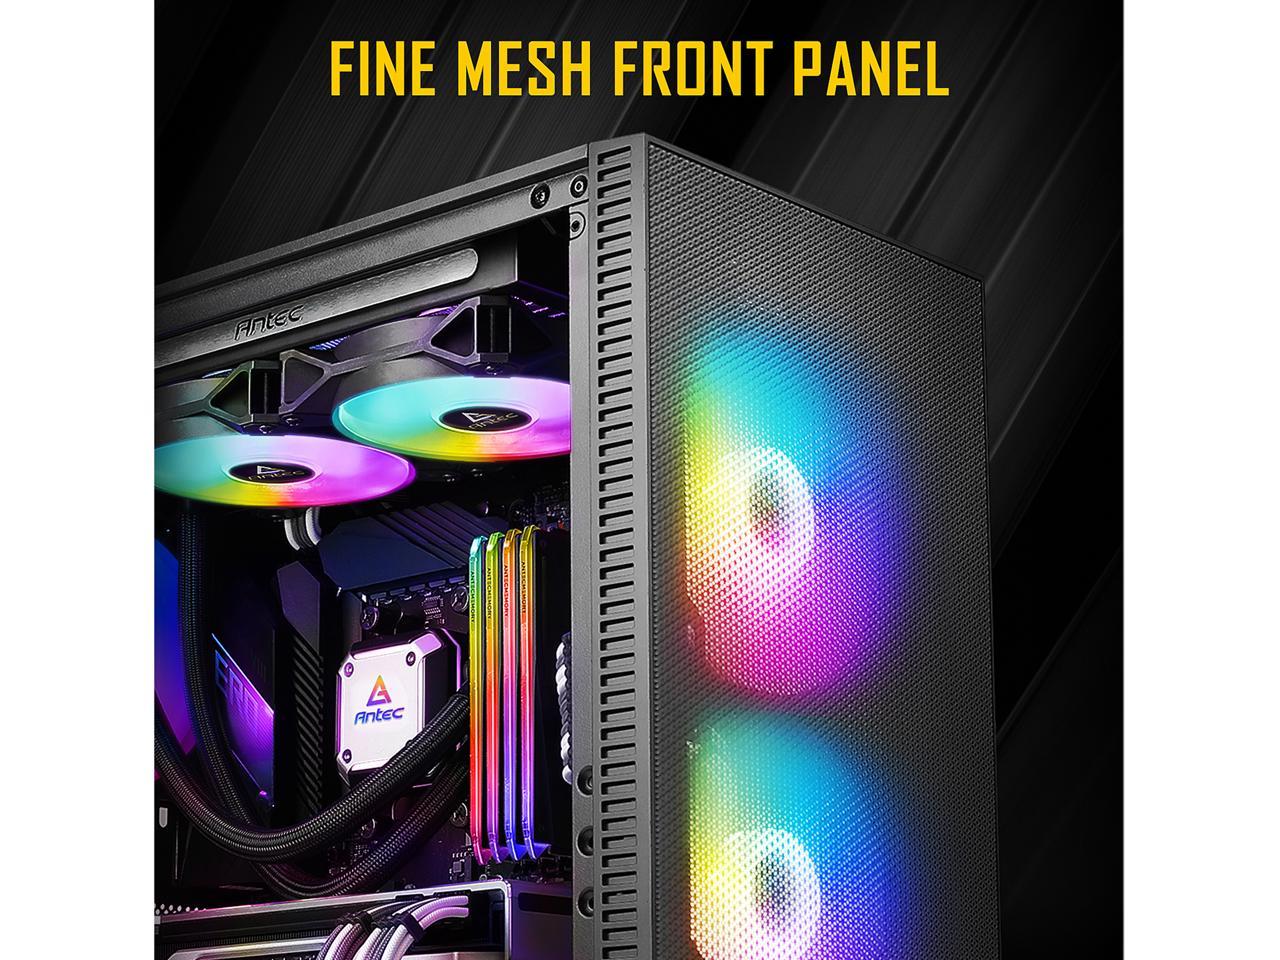 Antec NX Series NX410, 2 x 140mm & 1 x 120mm ARGB Fans Included, 360mm Radiator Support, Mesh Front Panel & Swing-Open Tempered Glass Side Panel ATX Mid-Tower Gaming Case - image 2 of 14